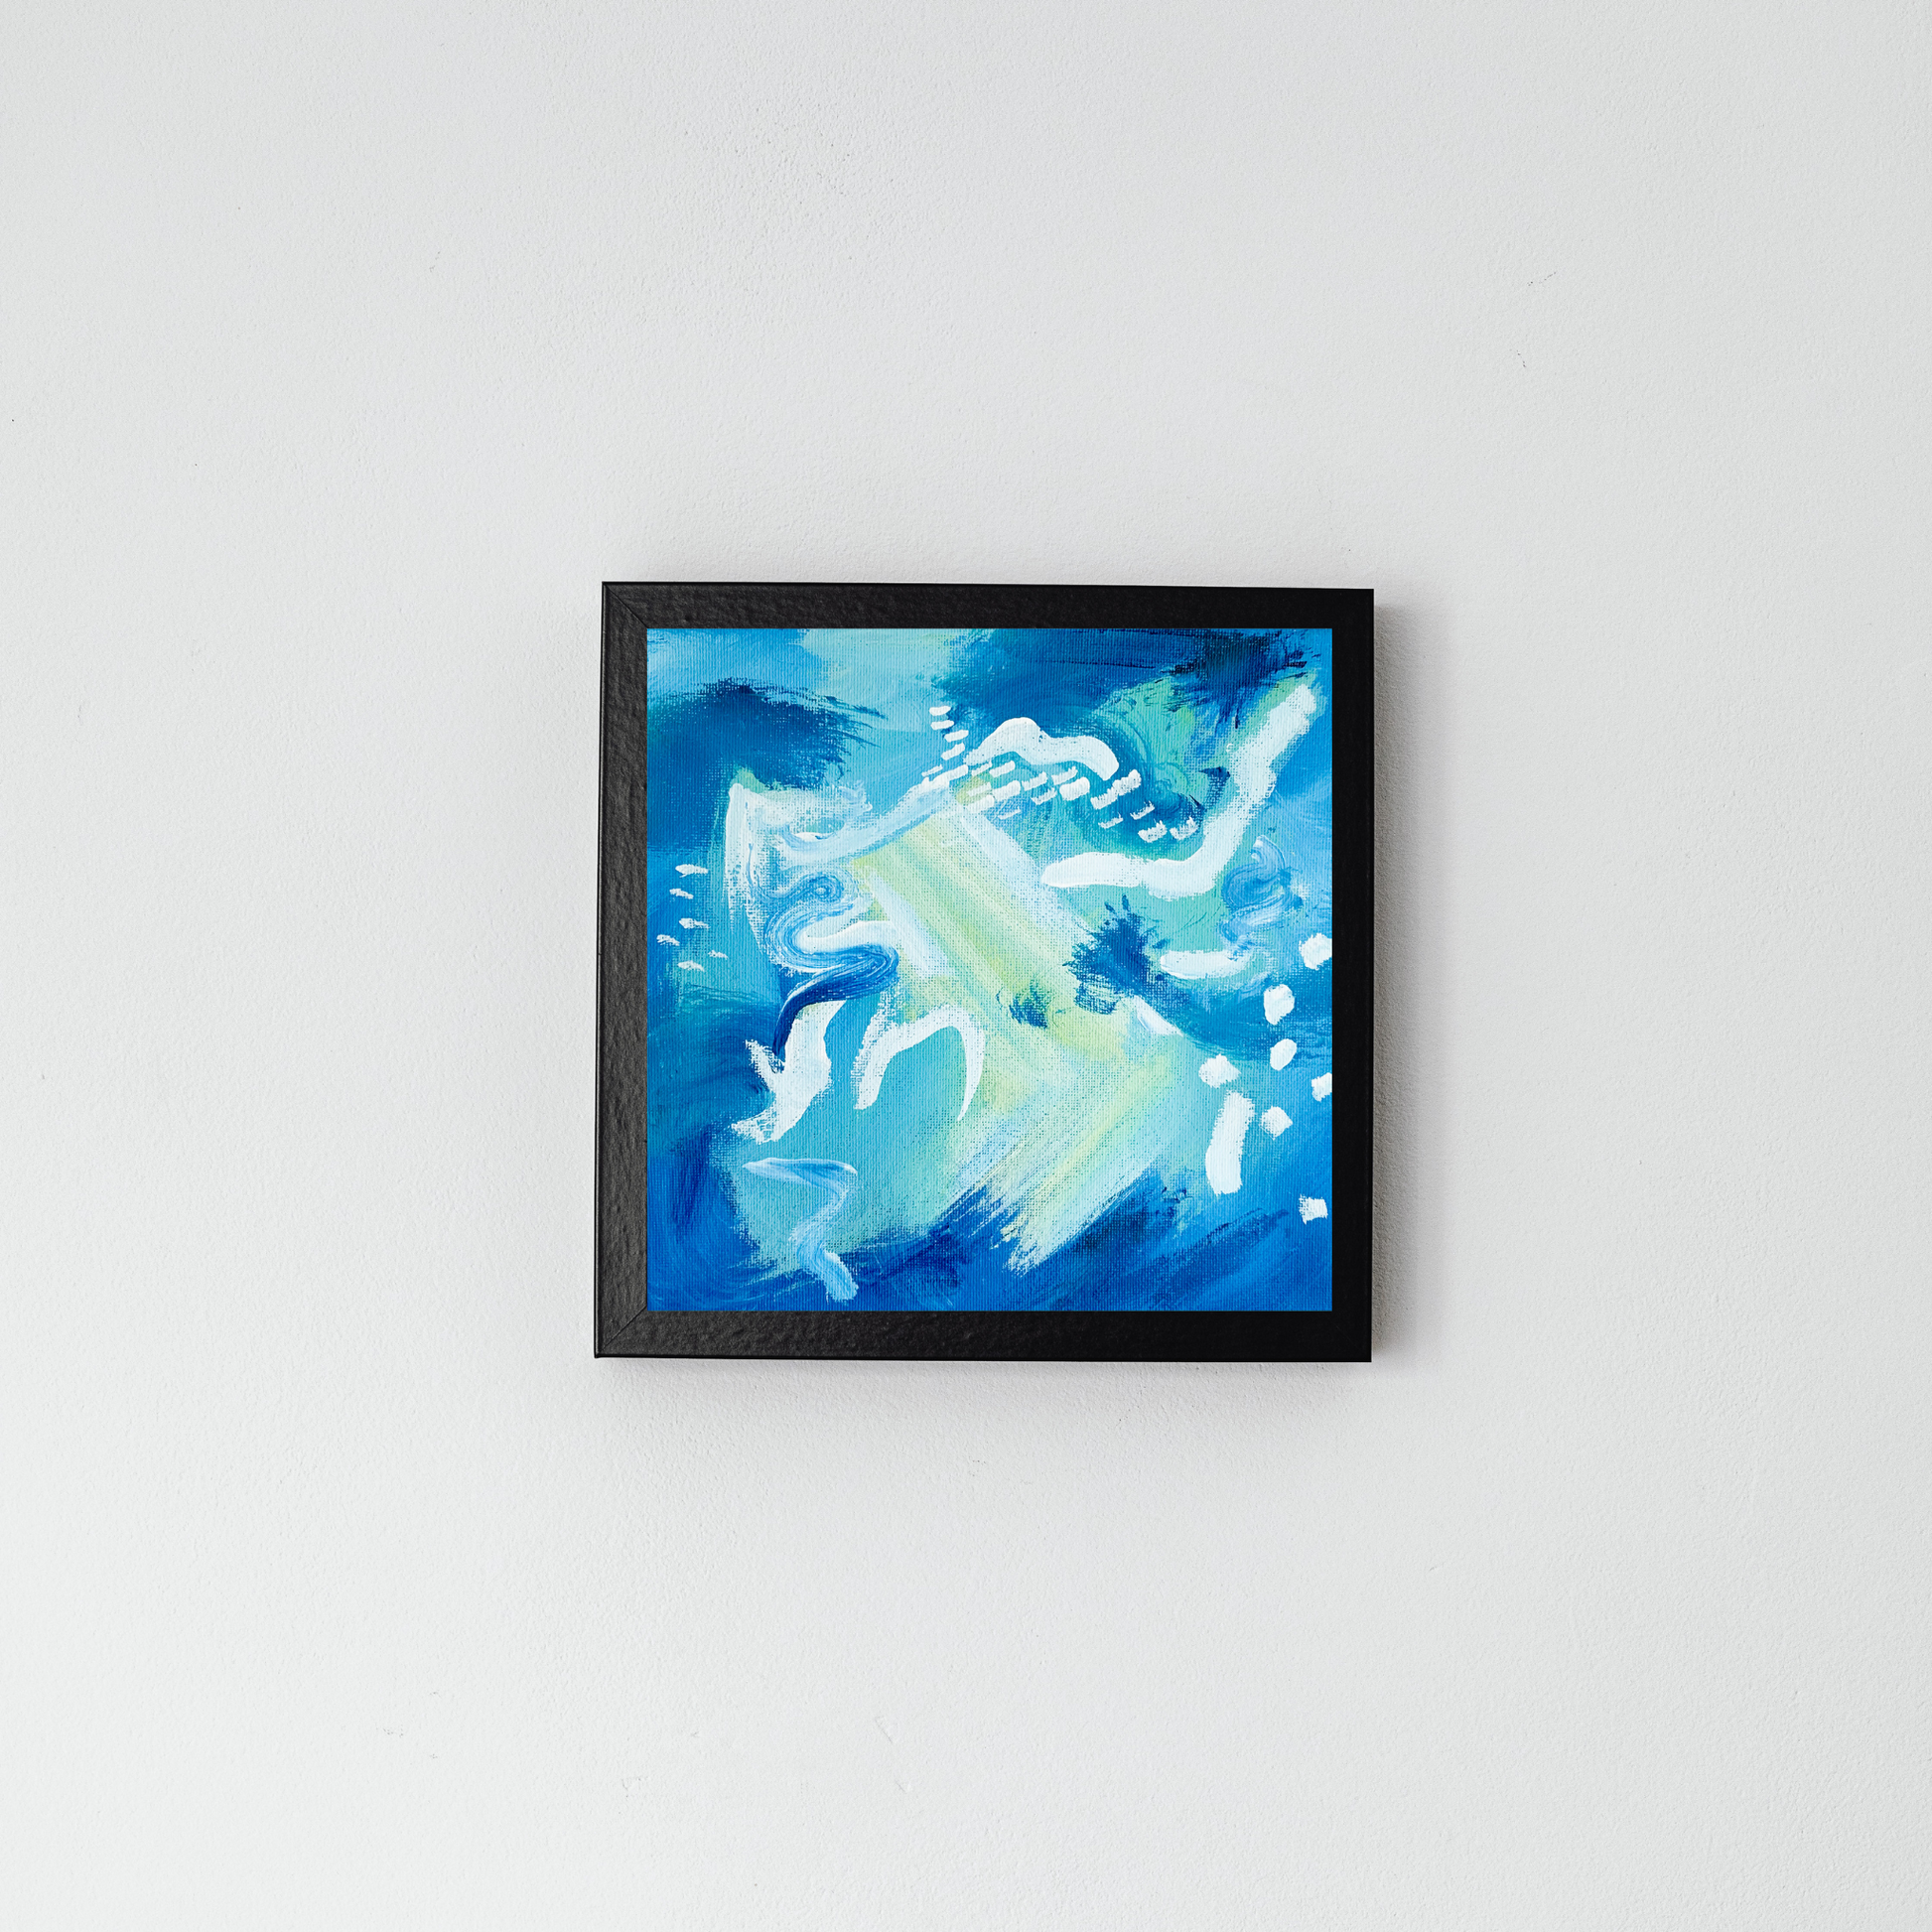 An abstract blue painting is pictured in a black frame on a grey wall with accents of white and yellow in a black frame on a grey wall